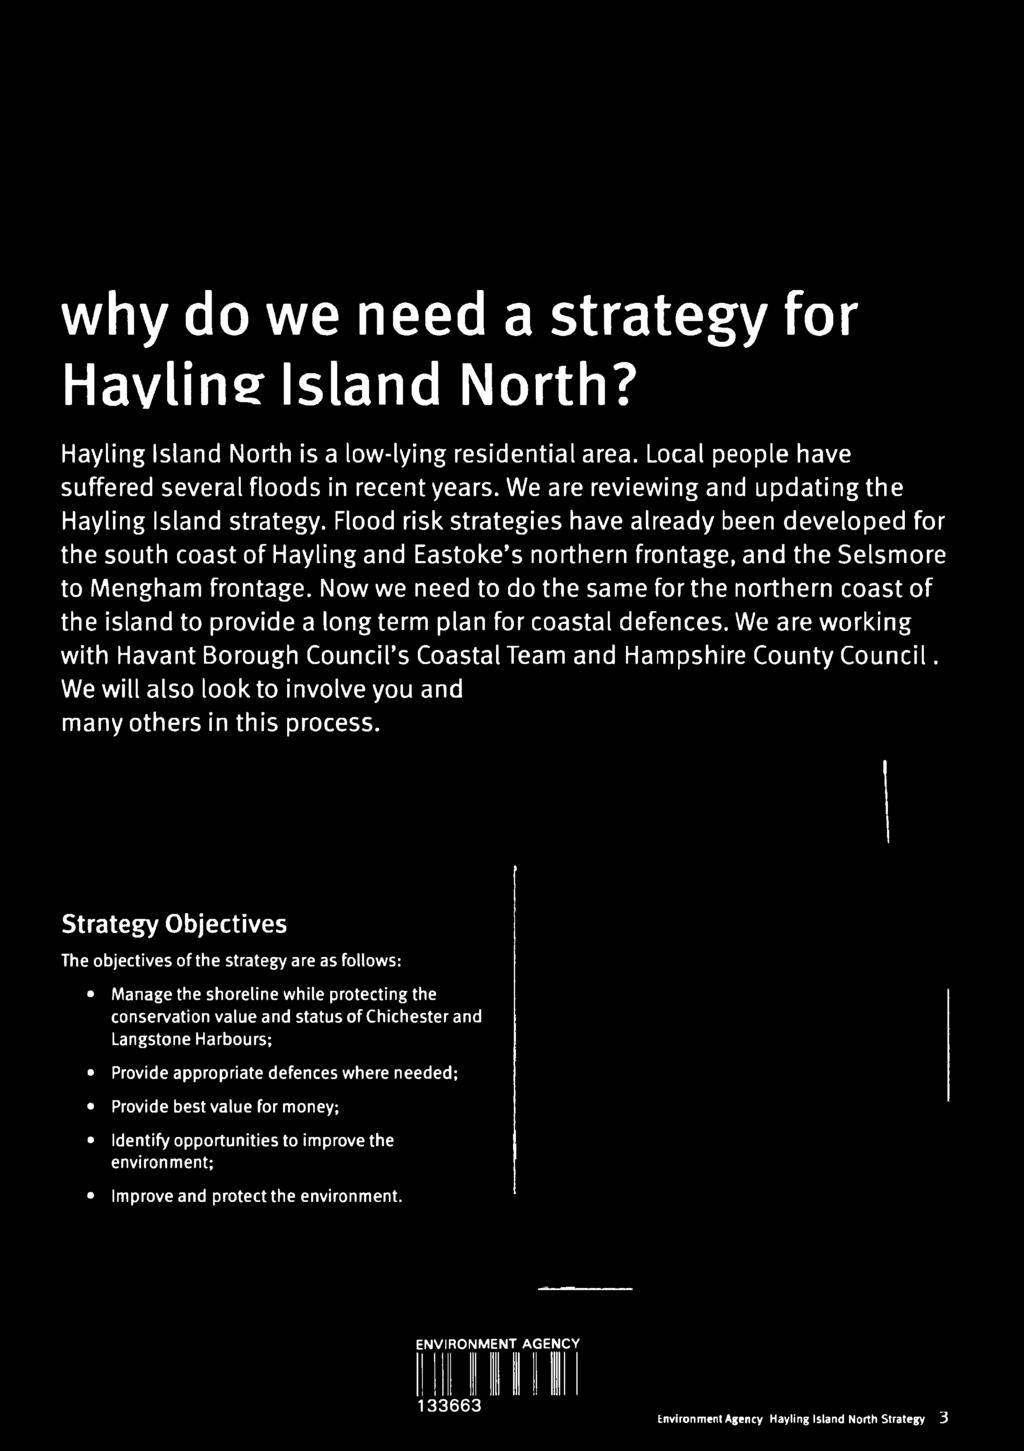 We are working with Havant Borough Council s Coastal Team and Hampshire County Council. We will also look to involve you and many others in this process.